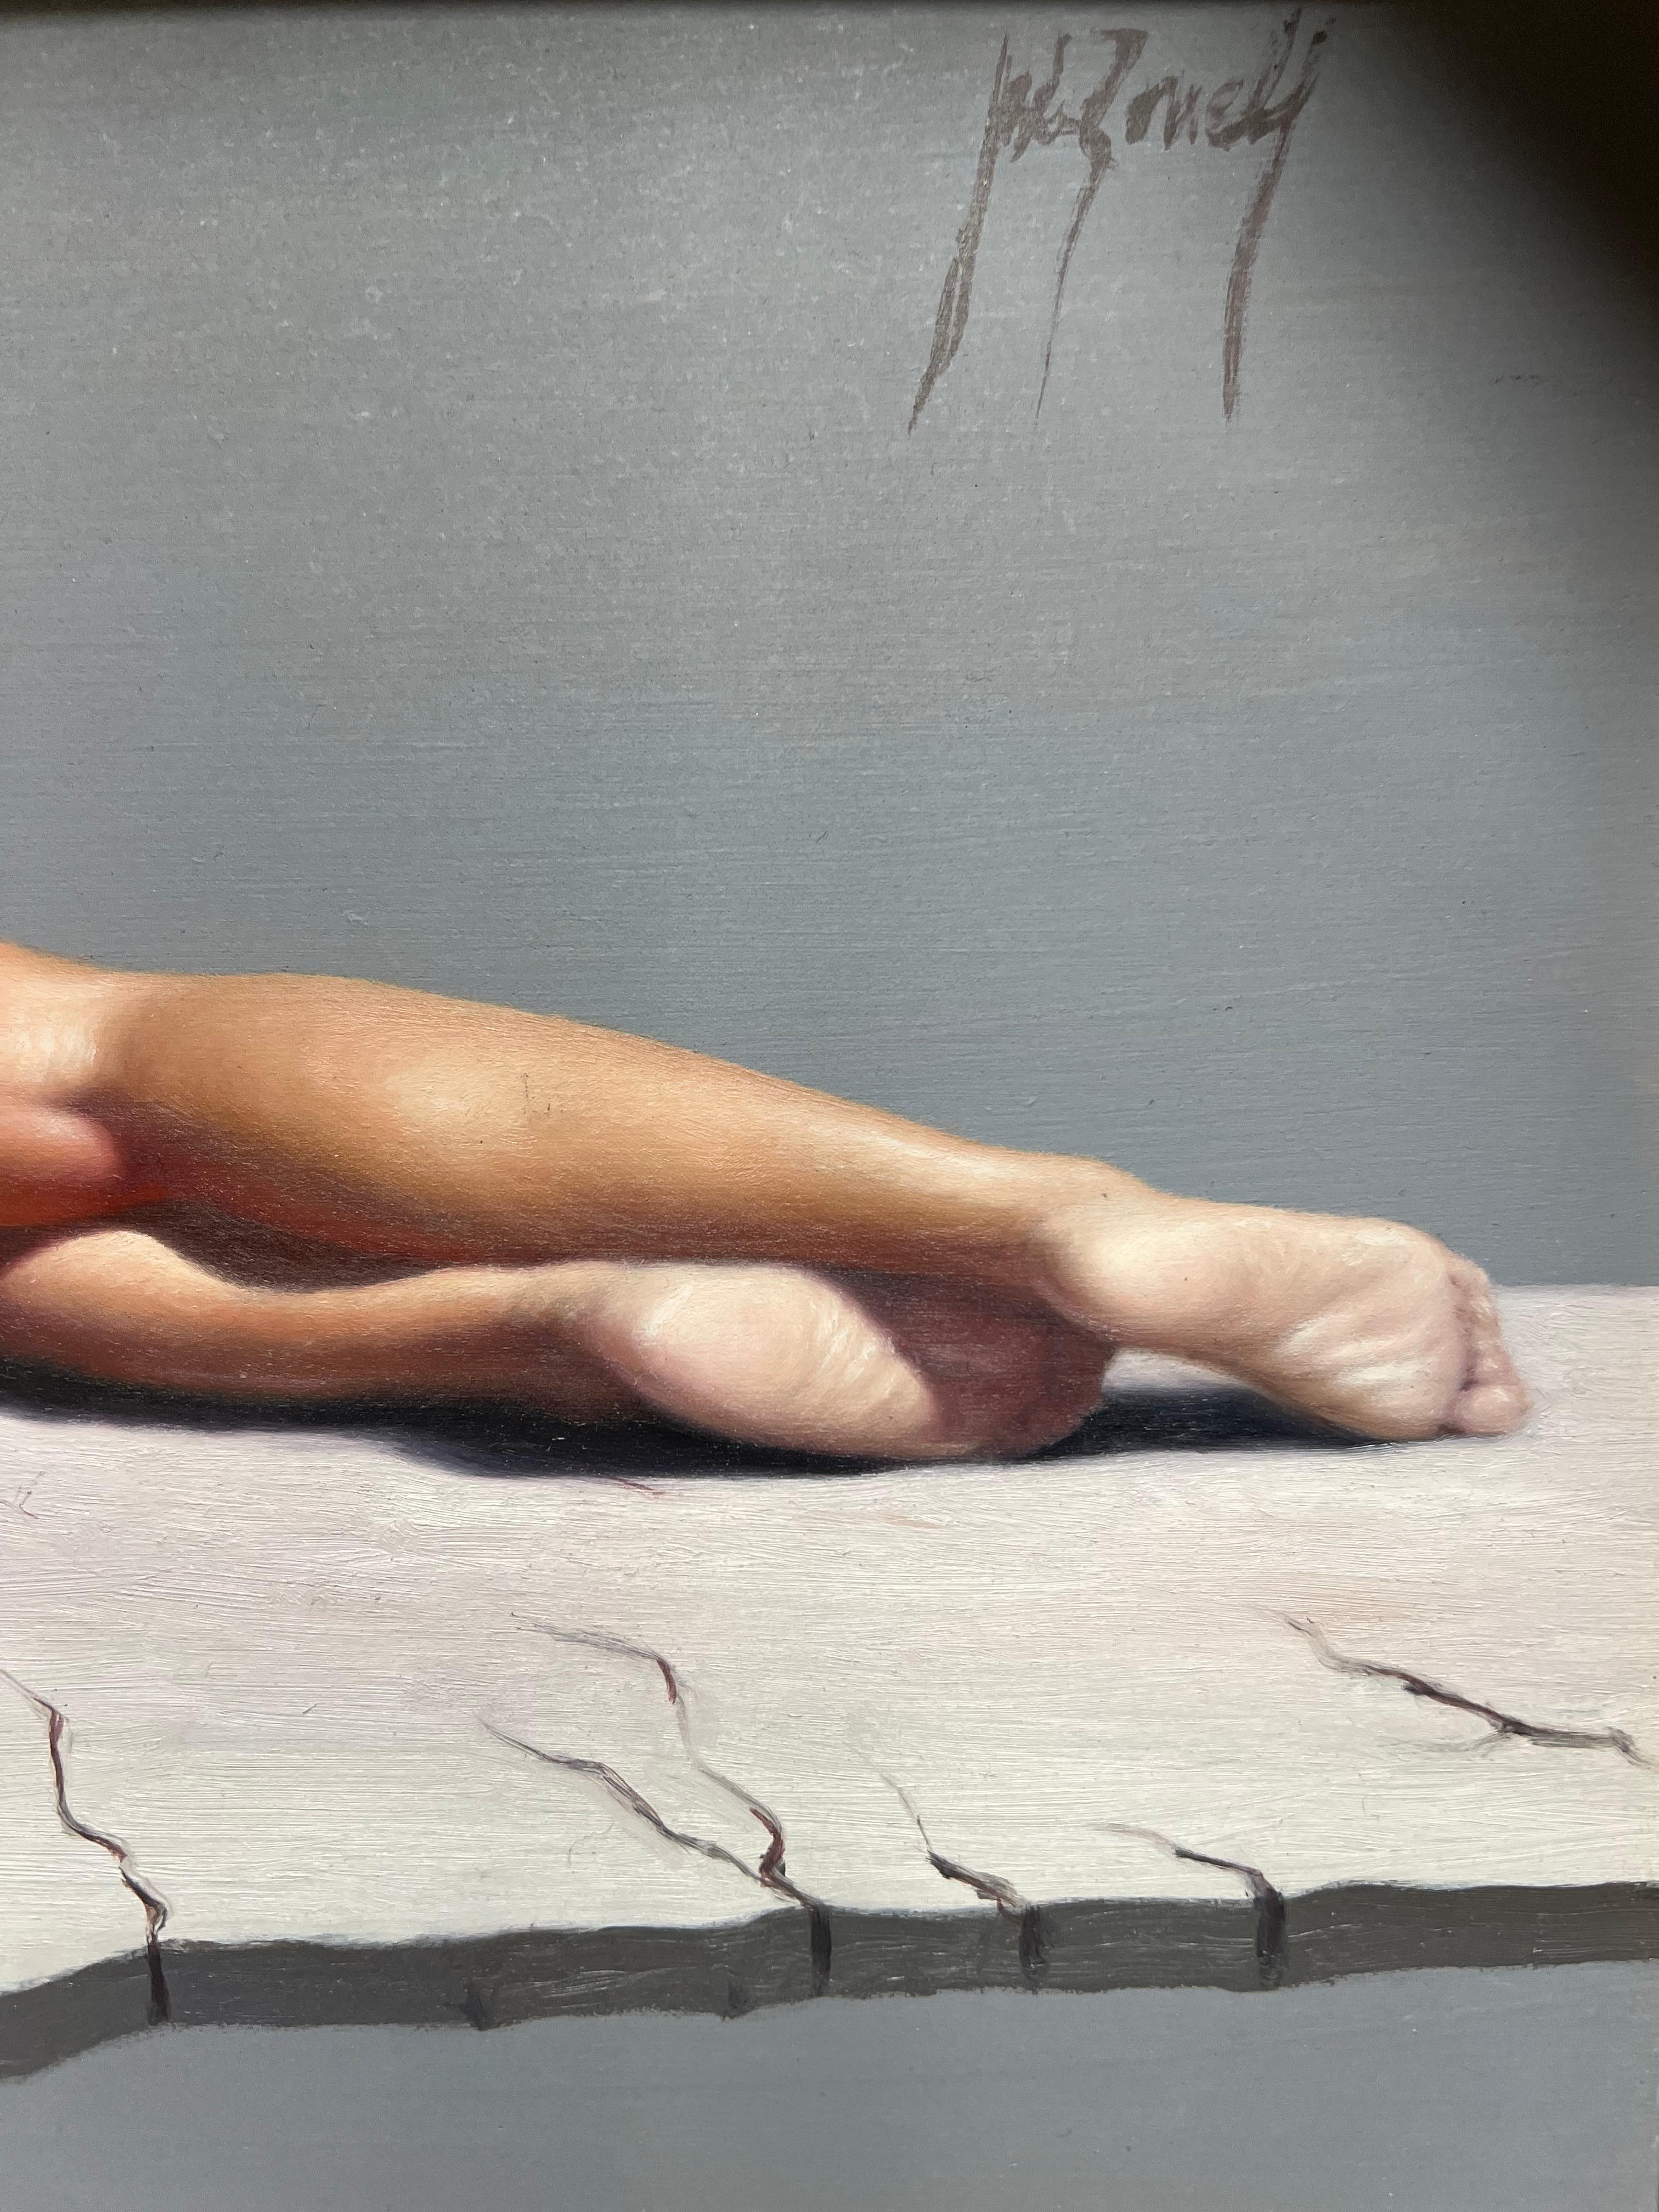 While You Sleep - Black Nude Painting by Jose Borrell